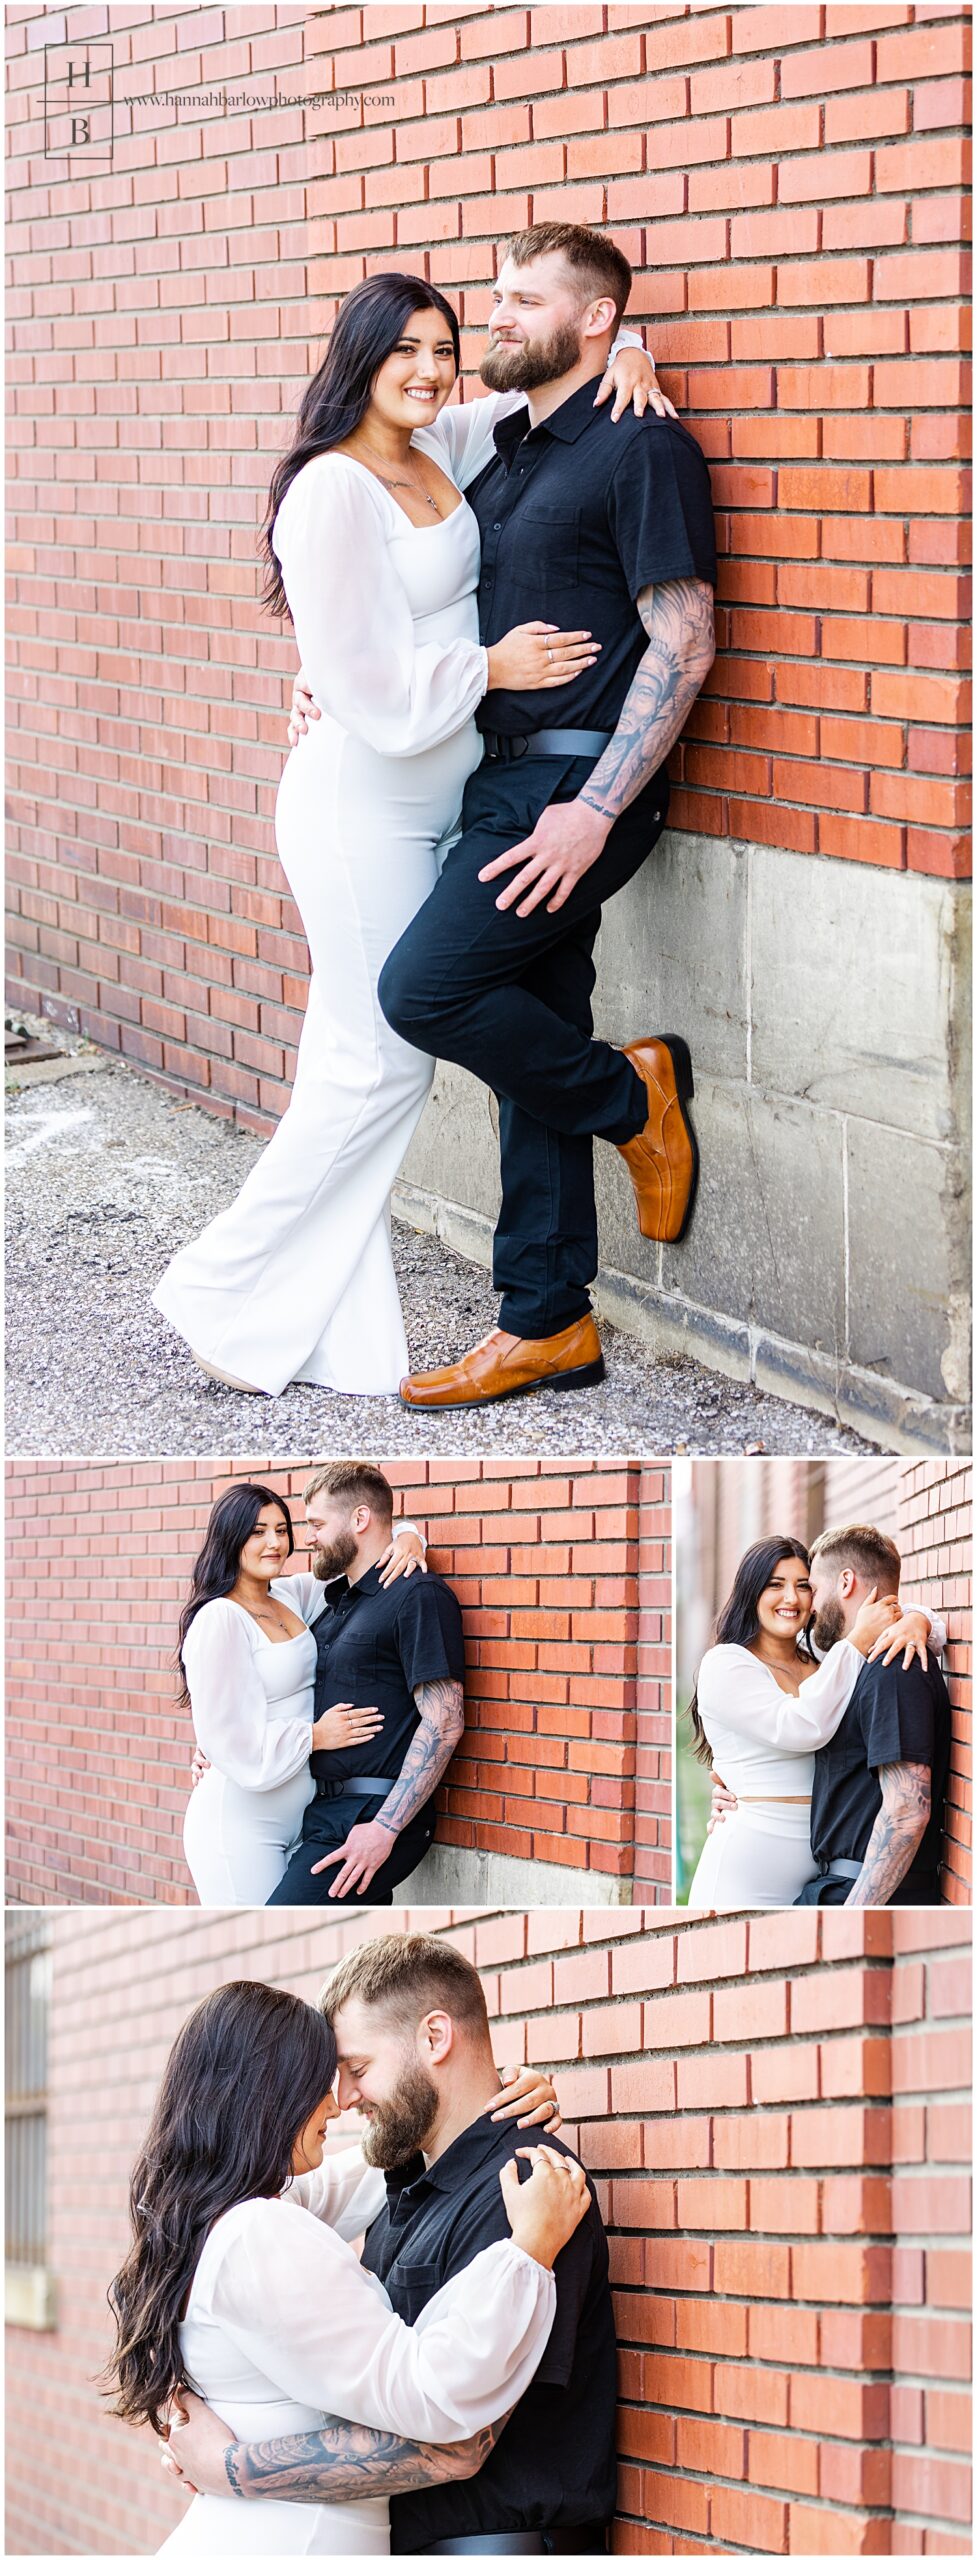 Couples poses up against brick wall for engagement photos in Wheeling WV